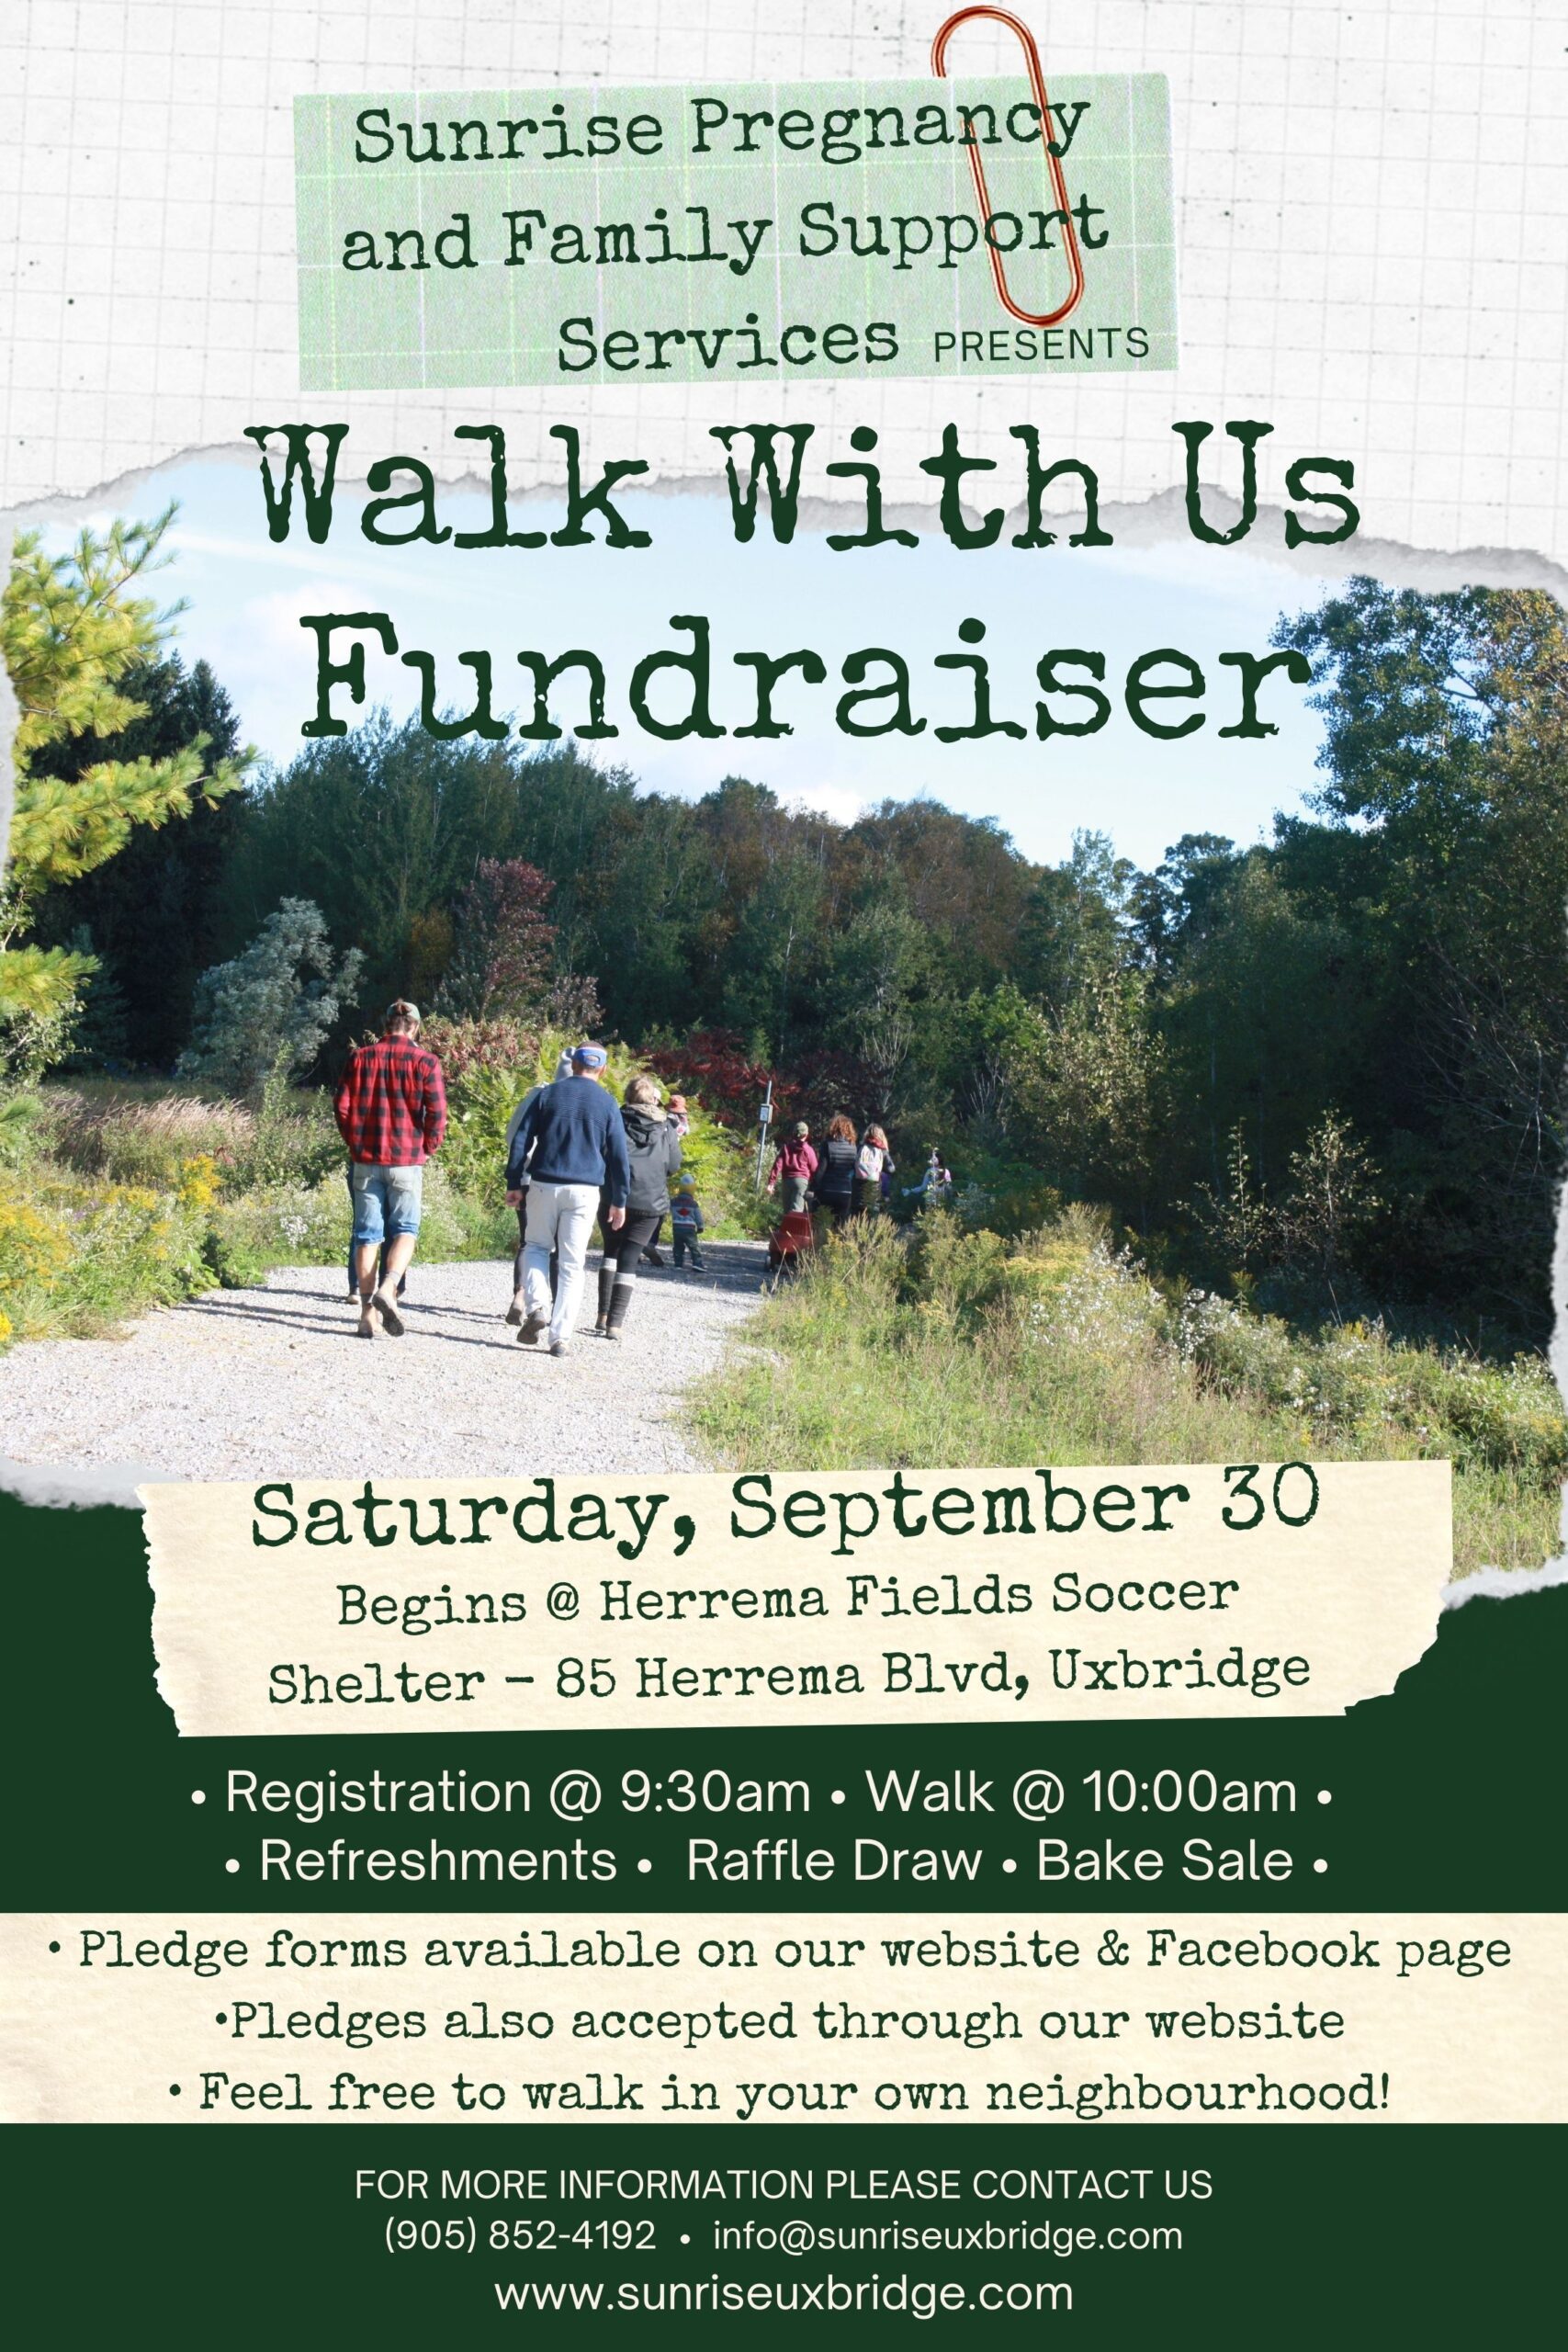 Annual Walk With Us Fundraiser